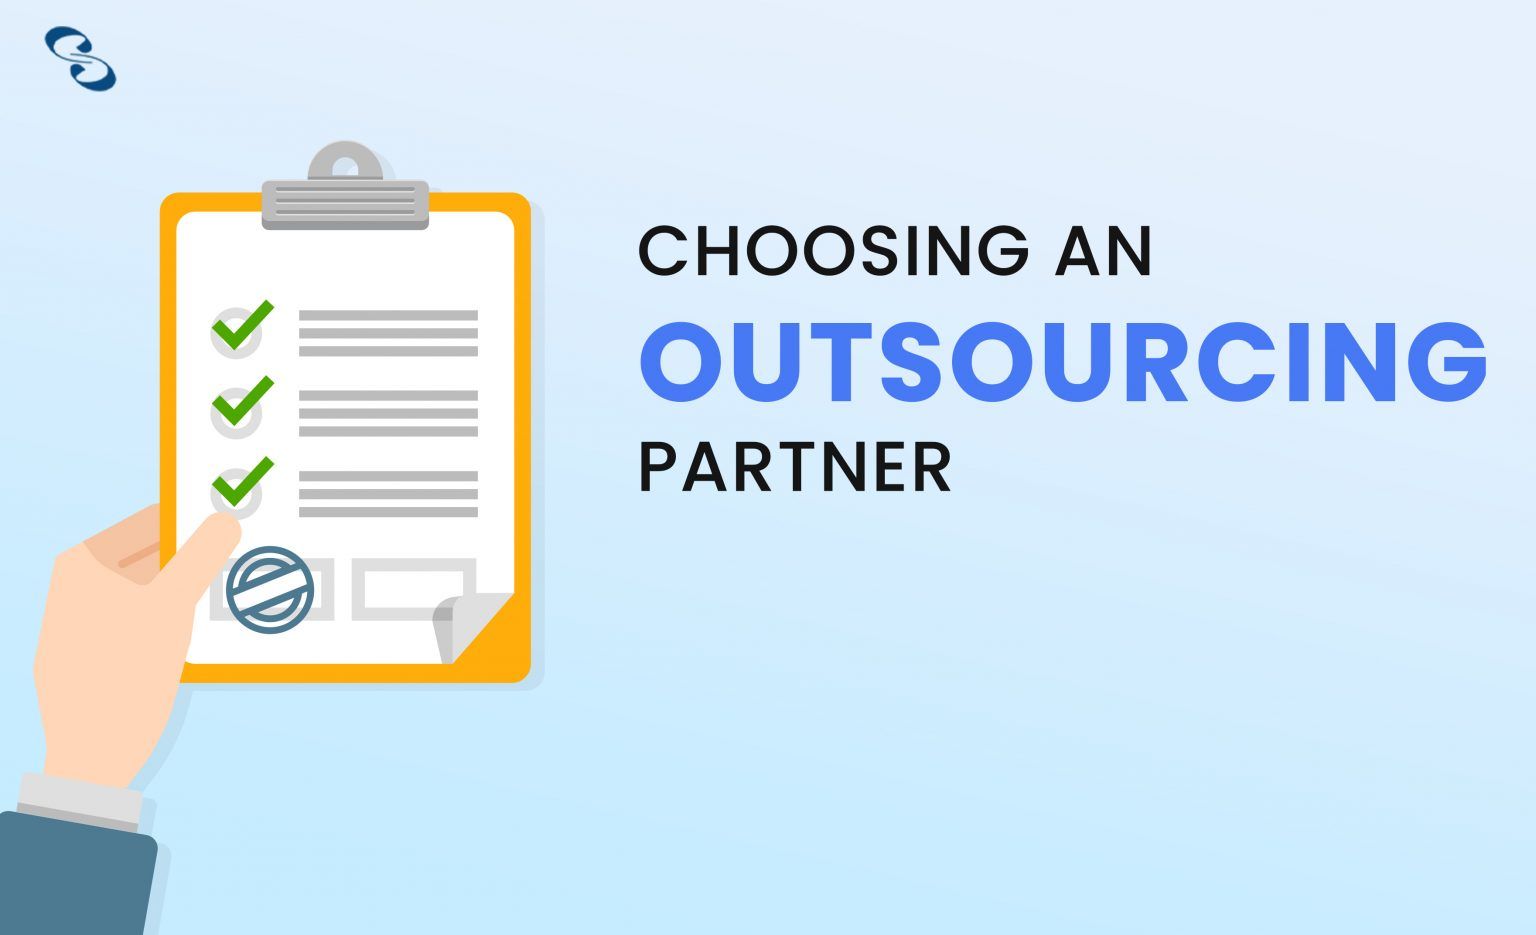 Relevant as an Outsourcing Partner